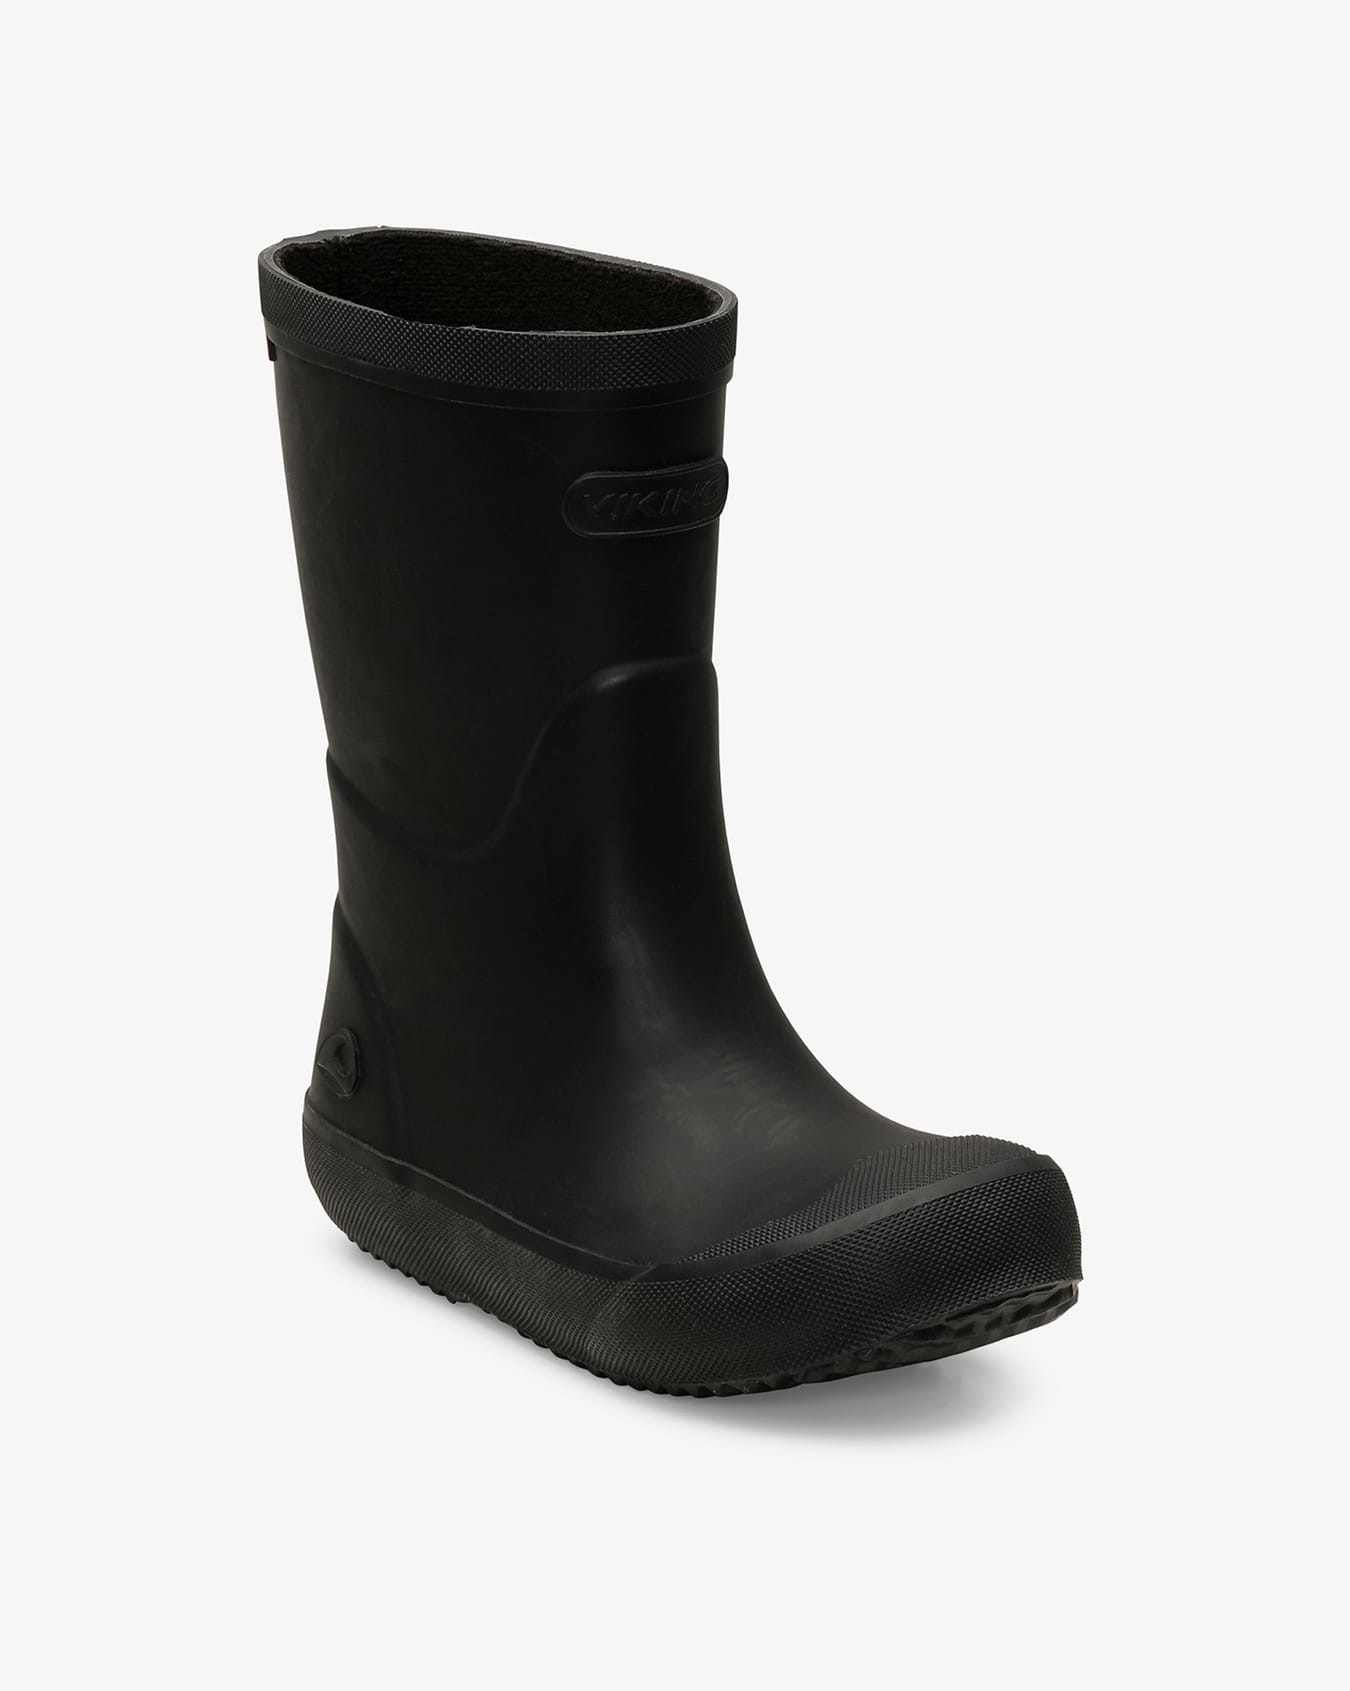 Classic Indie Black Rubber Boot